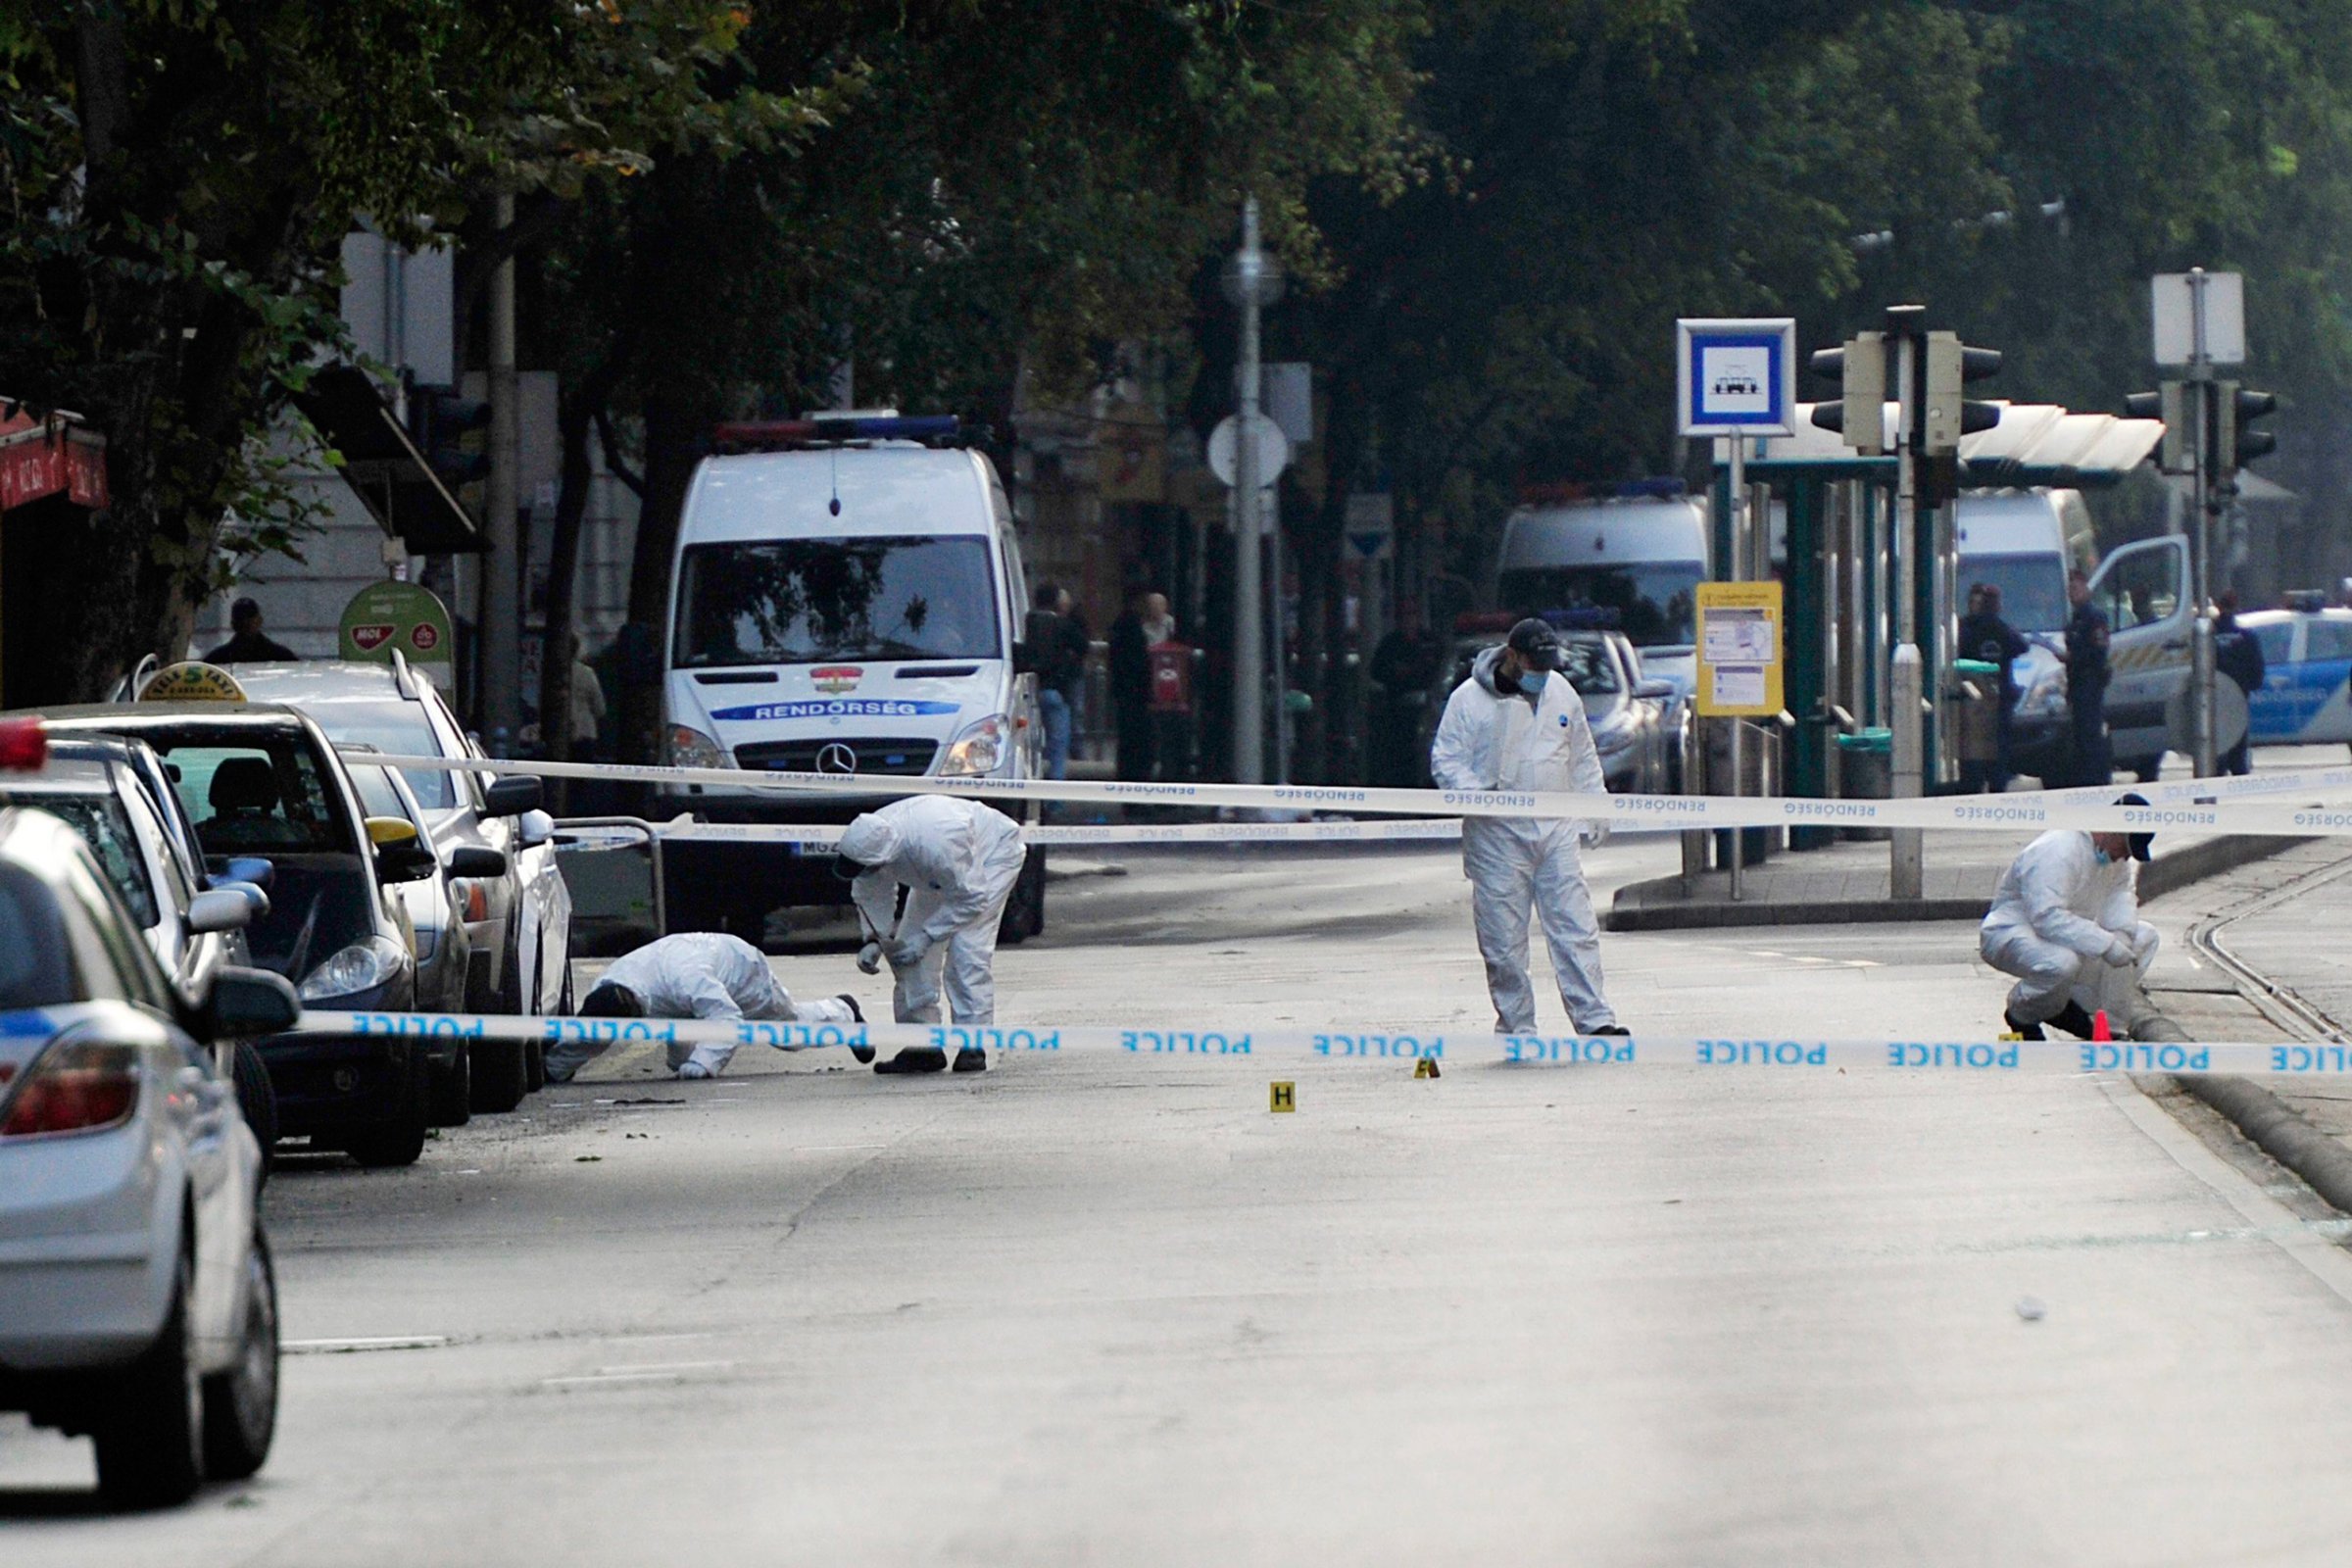 Police forensic experts examine the scene in central Budapest, Hungary, Sunday, Sept. 25, 2016, after an explosion of yet unknown origin occured in a shop late Saturday night. According to an expert apparently a home made bomb went off in front of the shop. The explosion injured two patrolling policemen. (Peter Lakatos/MTI via AP)